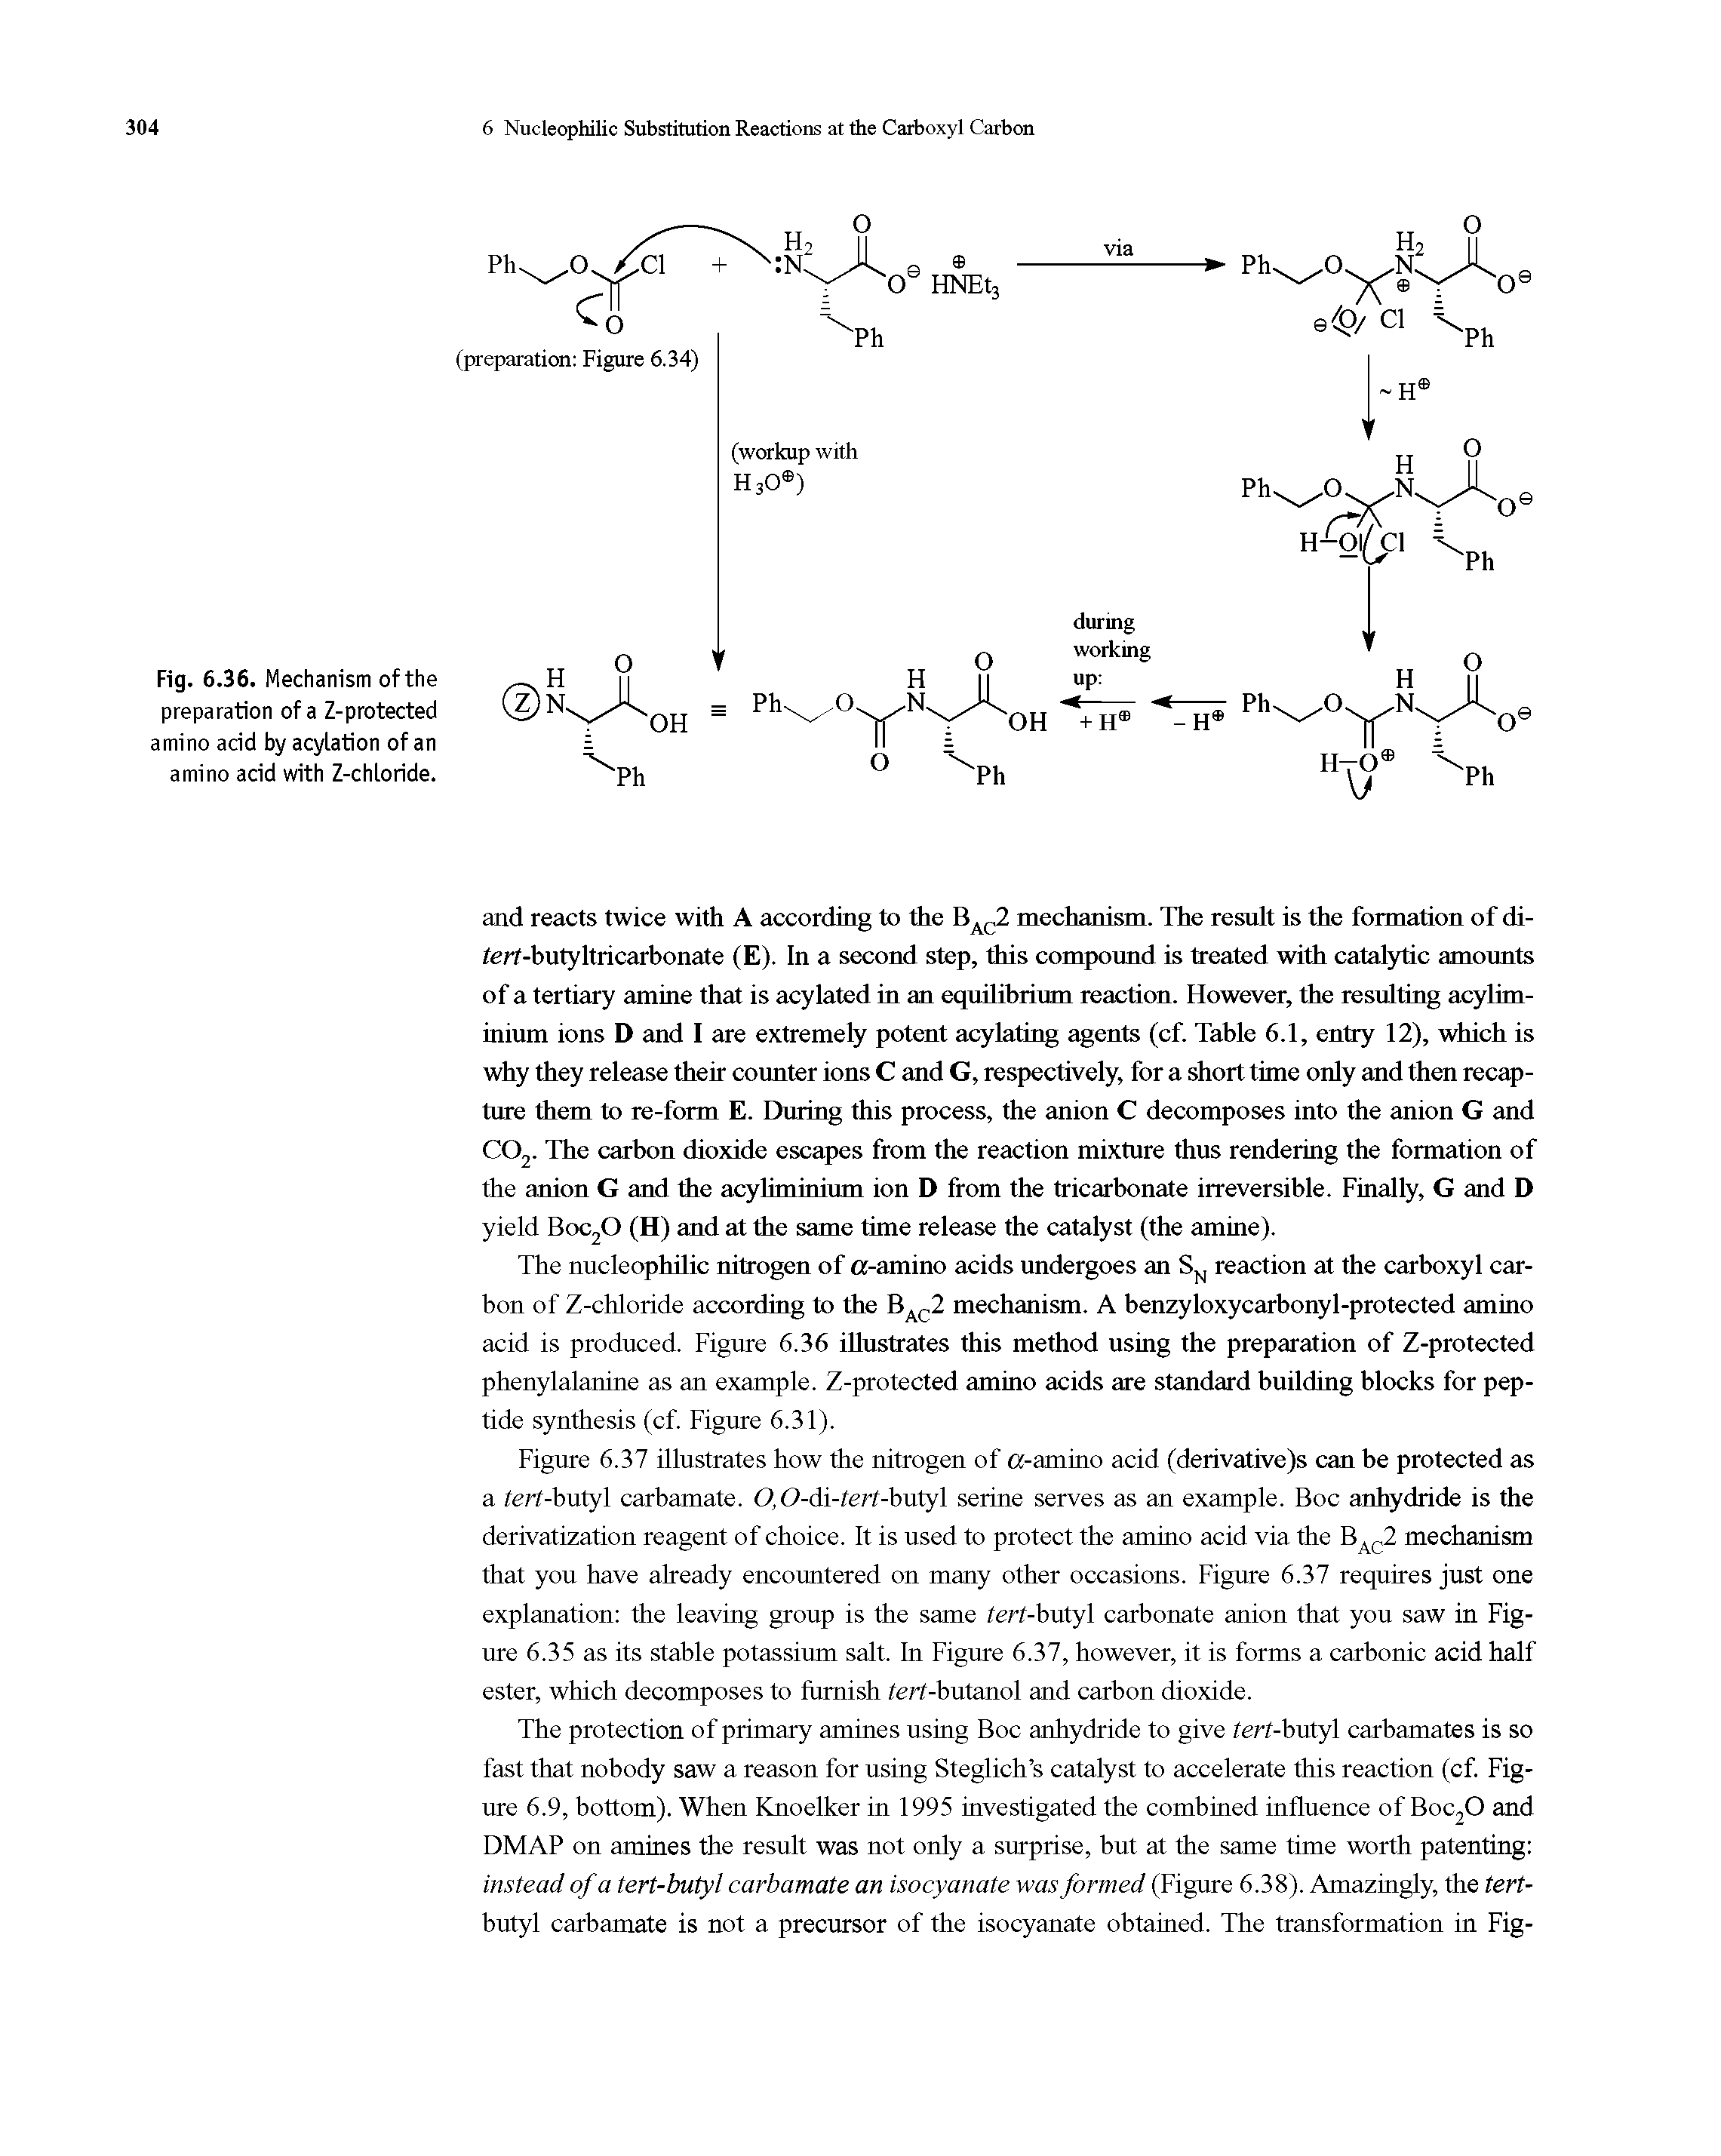 Fig. 6.36. Mechanism of the preparation of a Z-protected amino acid by acylation of an amino acid with Z-chloride.